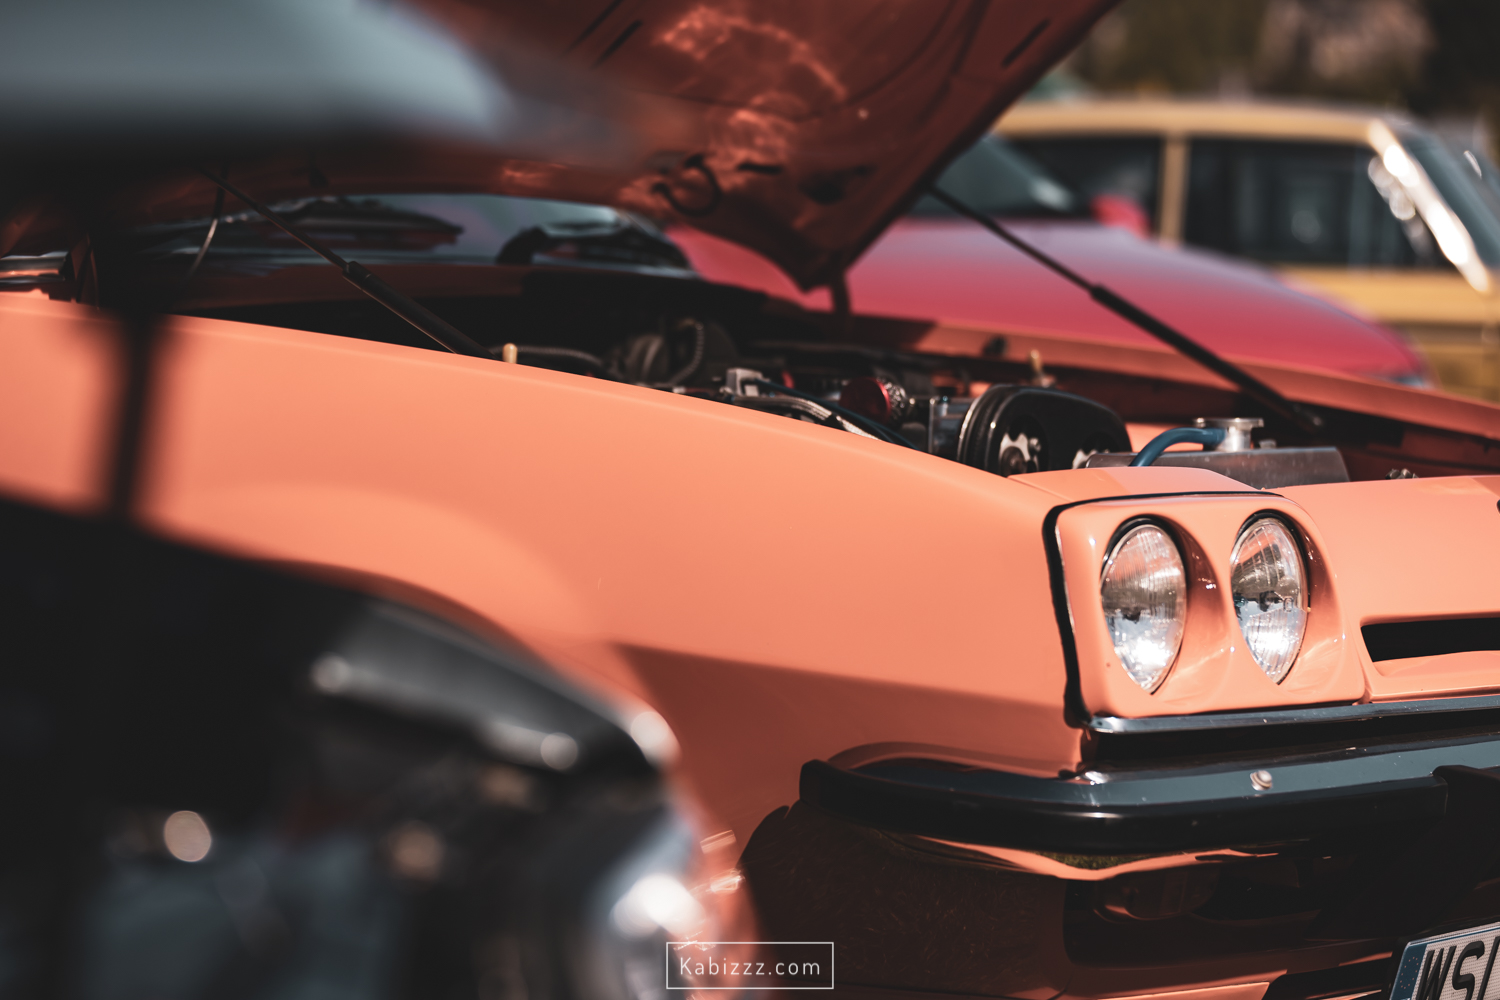 Kabizzz_Photography_Stirling_District_Classic _cars-30.jpg